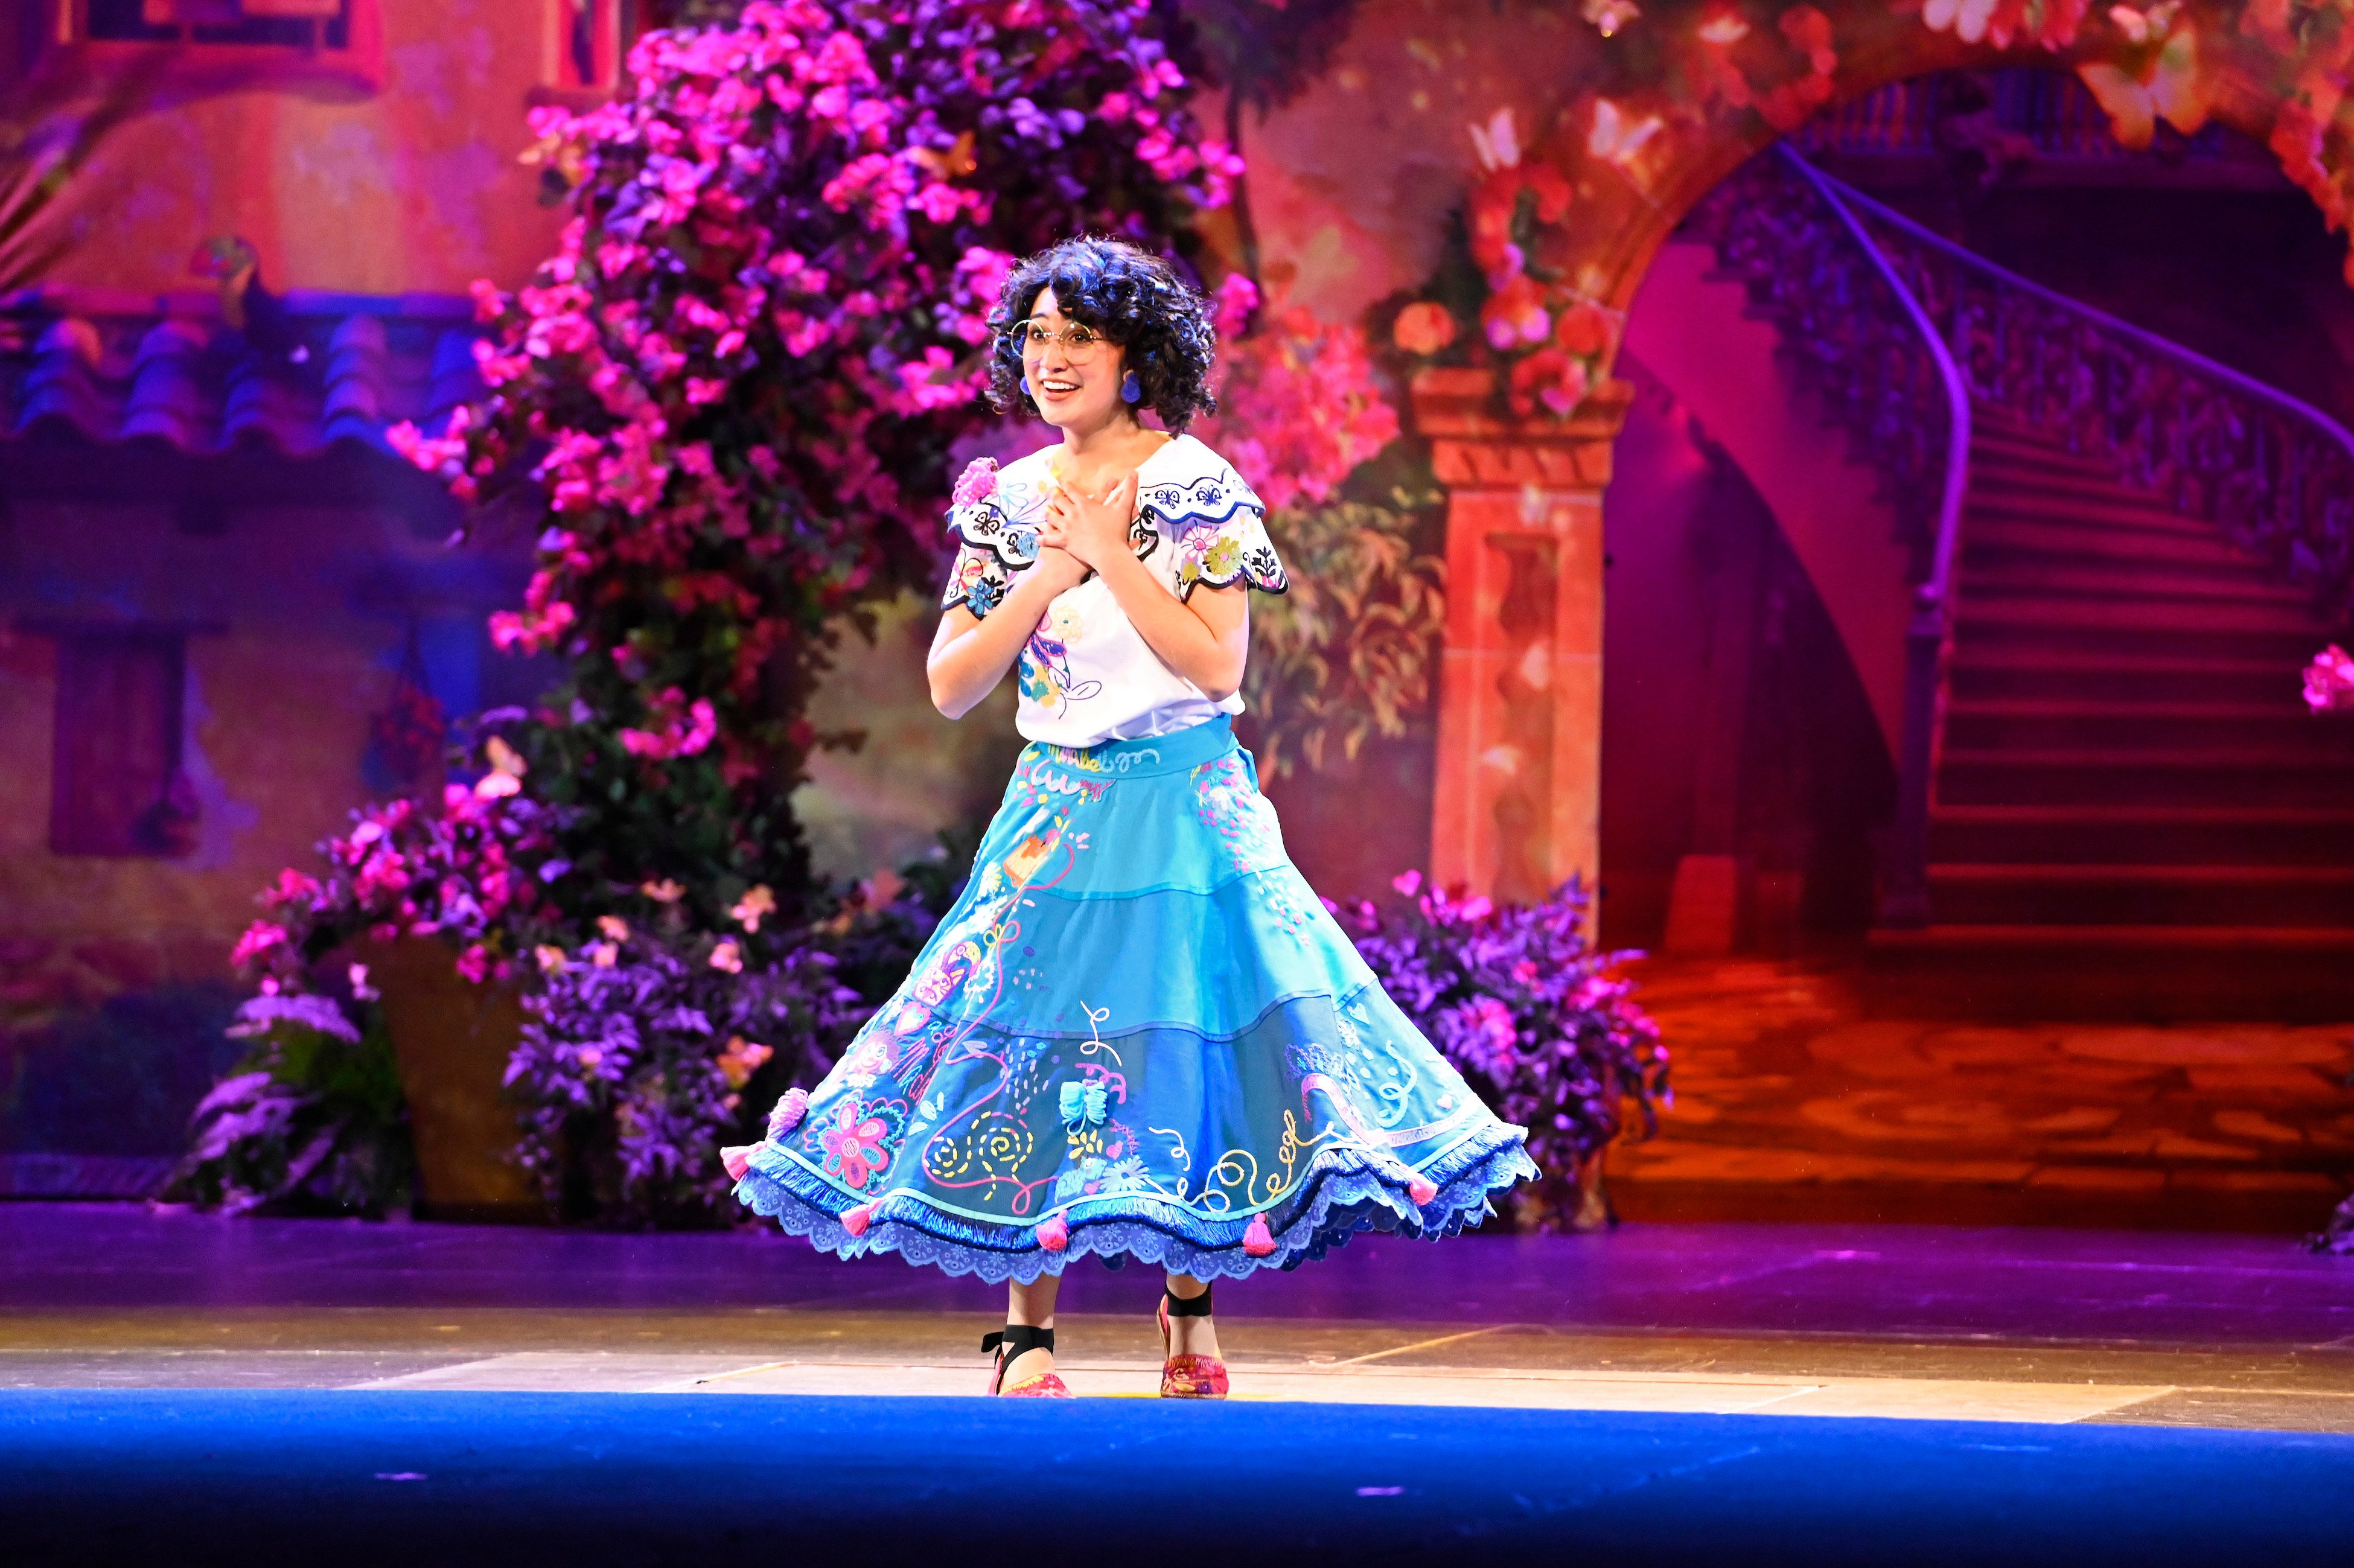 Disney character 'Mirabel' performs at the opening night fan event for Disney's 'Encanto'